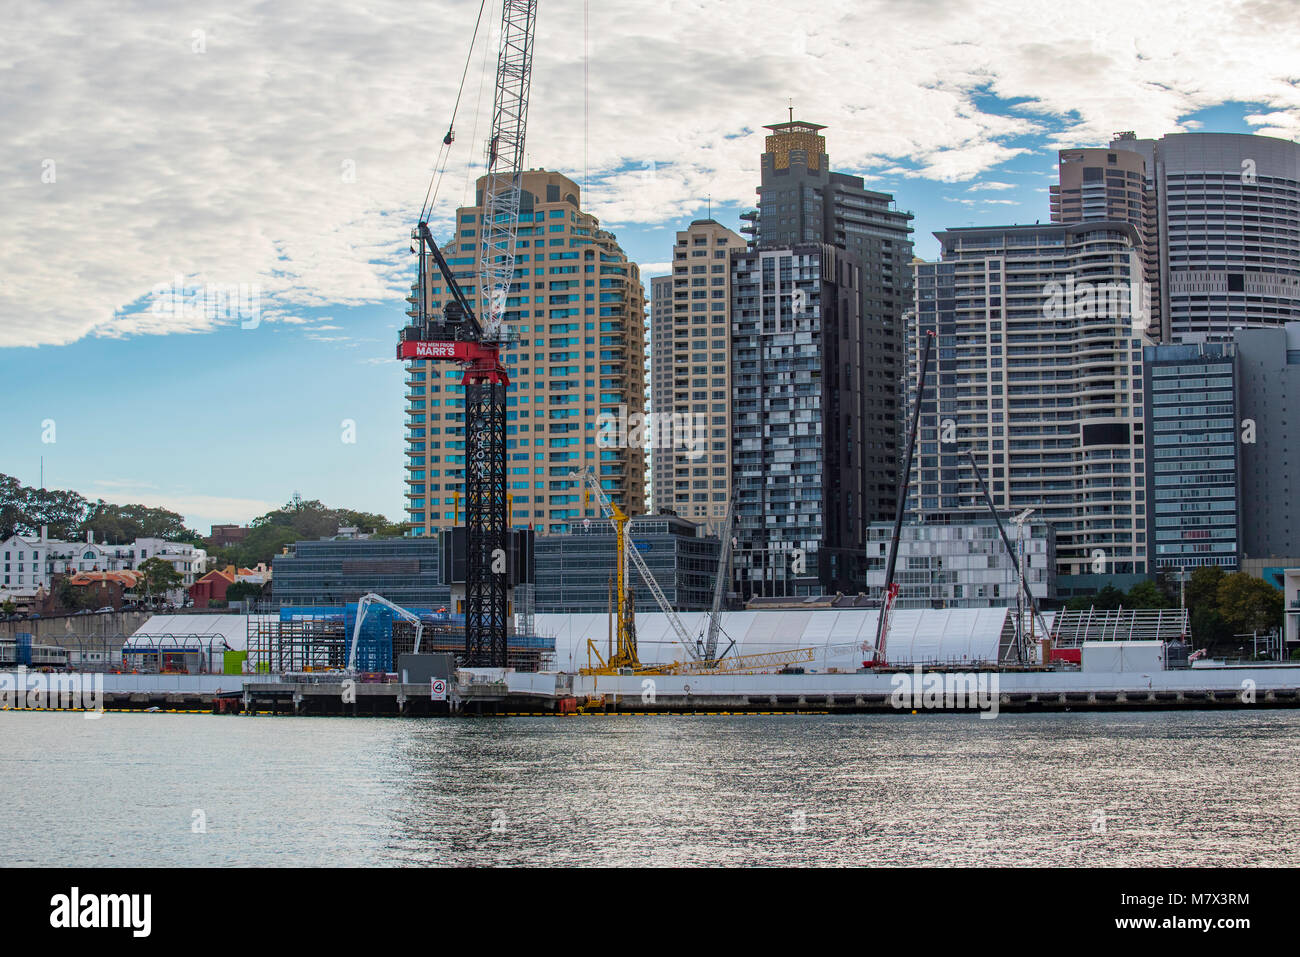 The beginnings of James Packer's new Crown Casino at Barangaroo on Sydney Harbor in Australia. The Crown Casino will be the tallest building in Sydney. Stock Photo